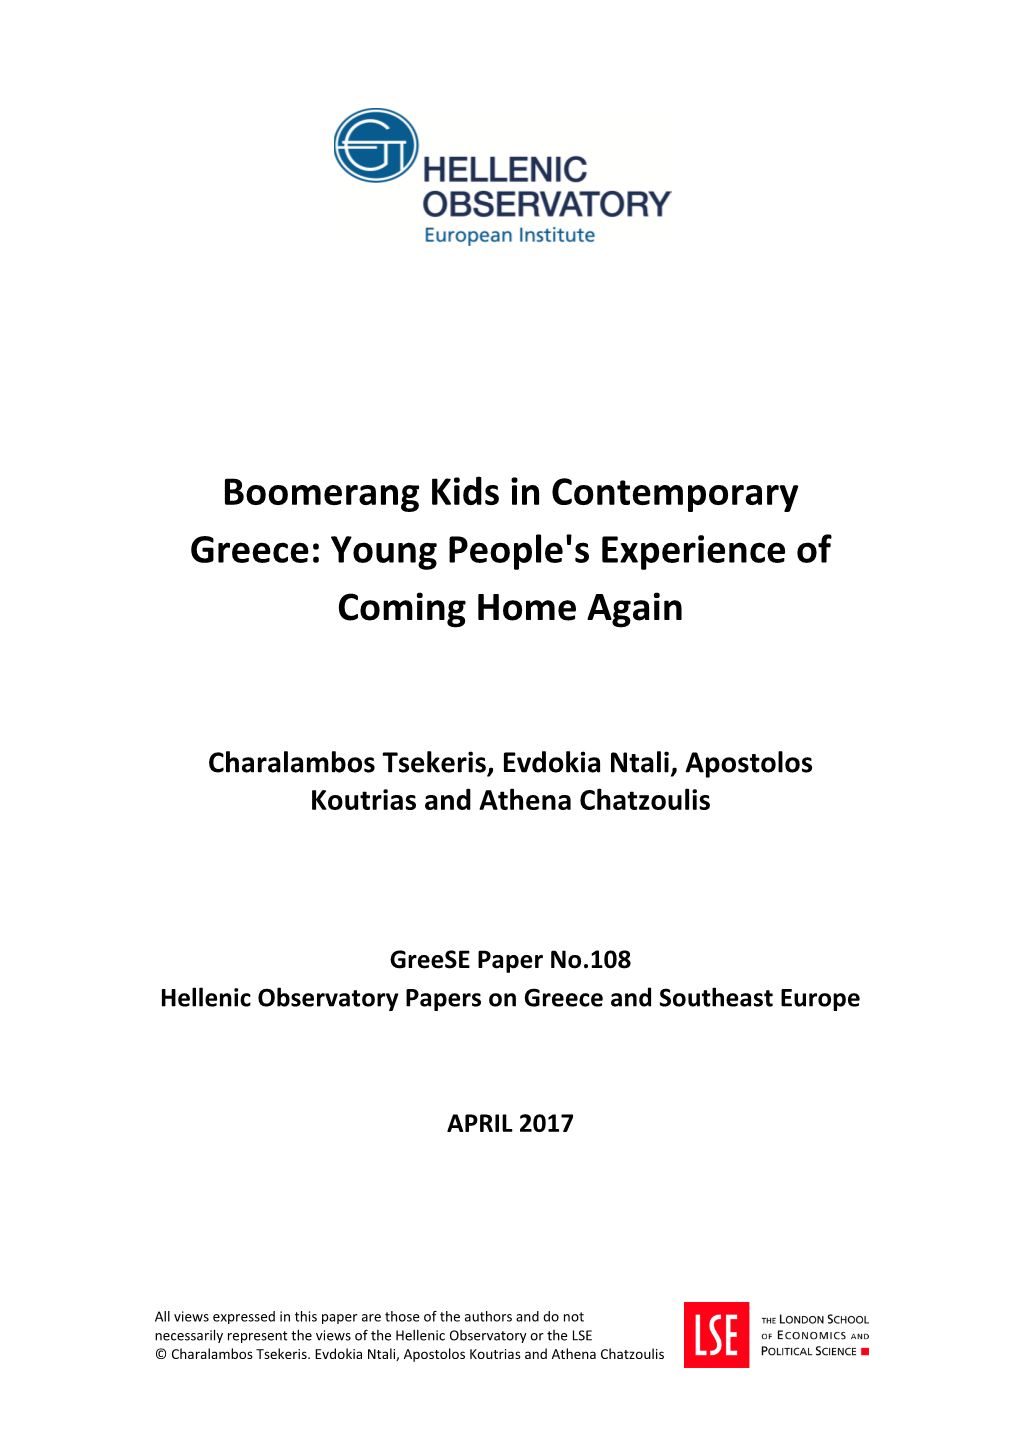 Boomerang Kids in Contemporary Greece: Young People's Experience of Coming Home Again